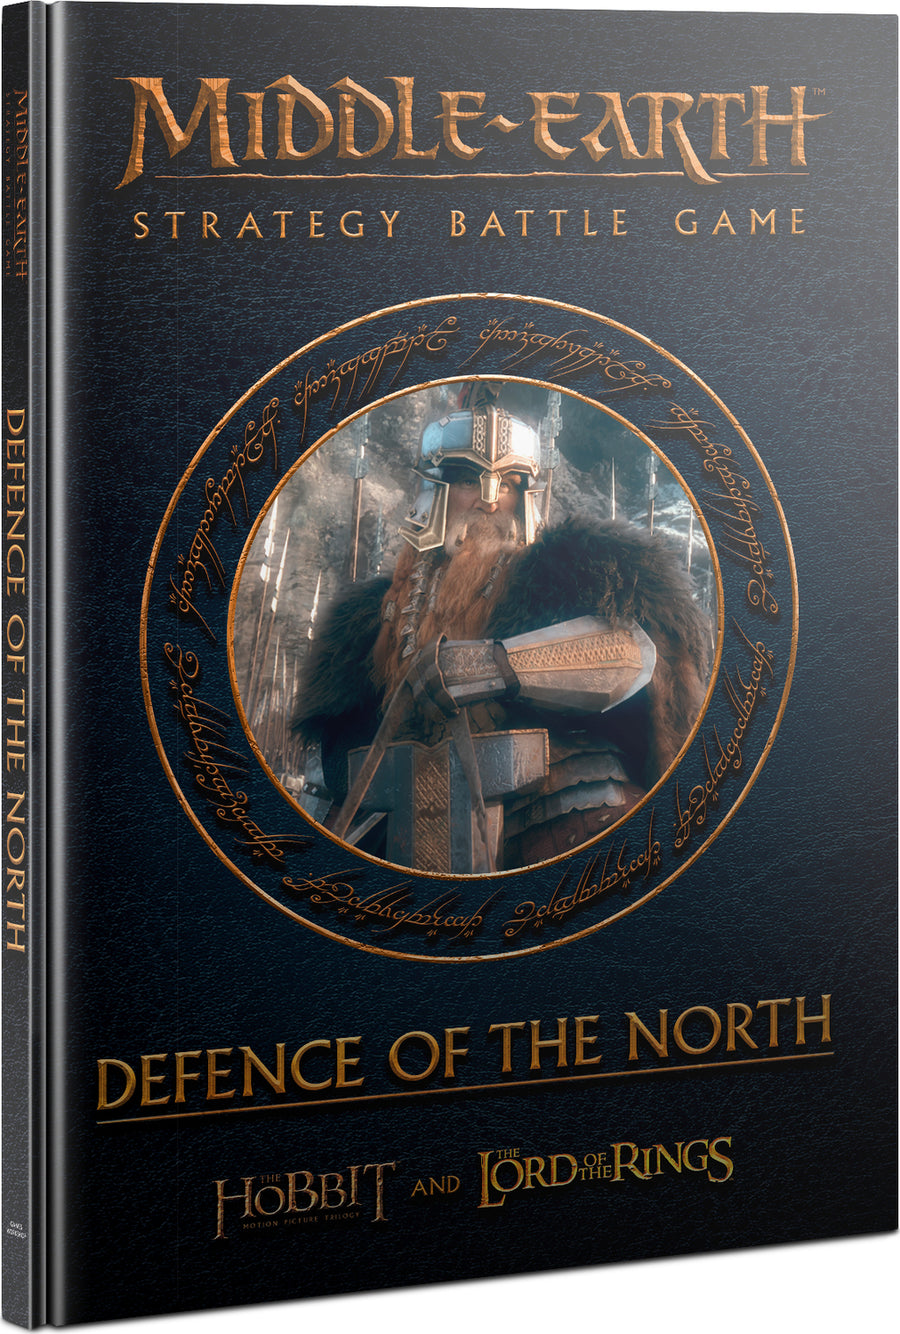 M-E SBG: DEFENCE of THE NORTH